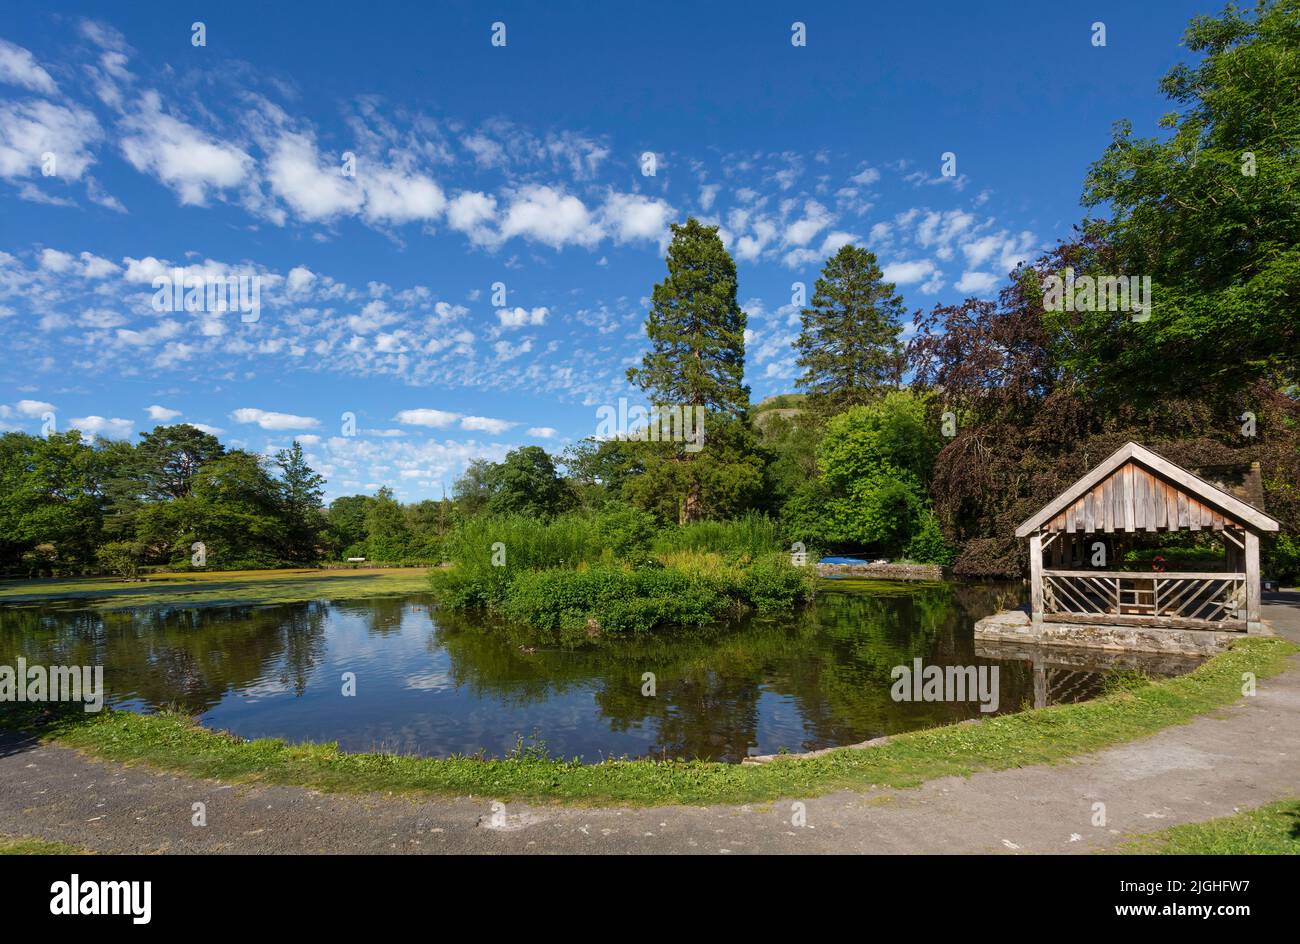 Summer scene at the main lake at Craig y Nos Country park in the Swansea Valley, South Wales UK. Stock Photo